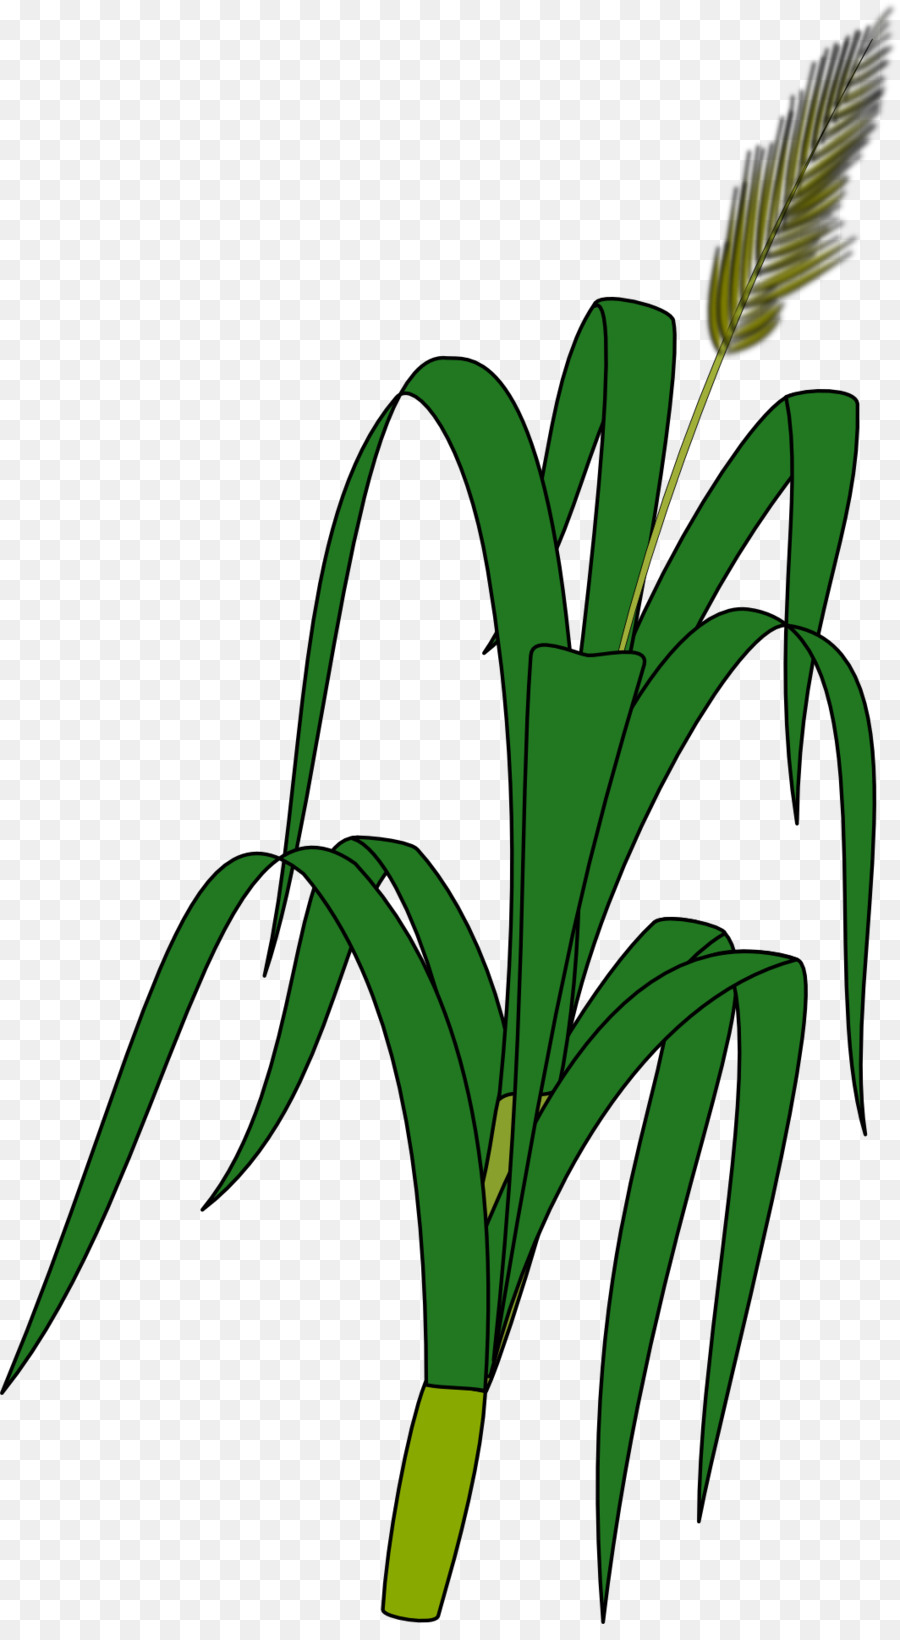 agriculture clipart wheat plant